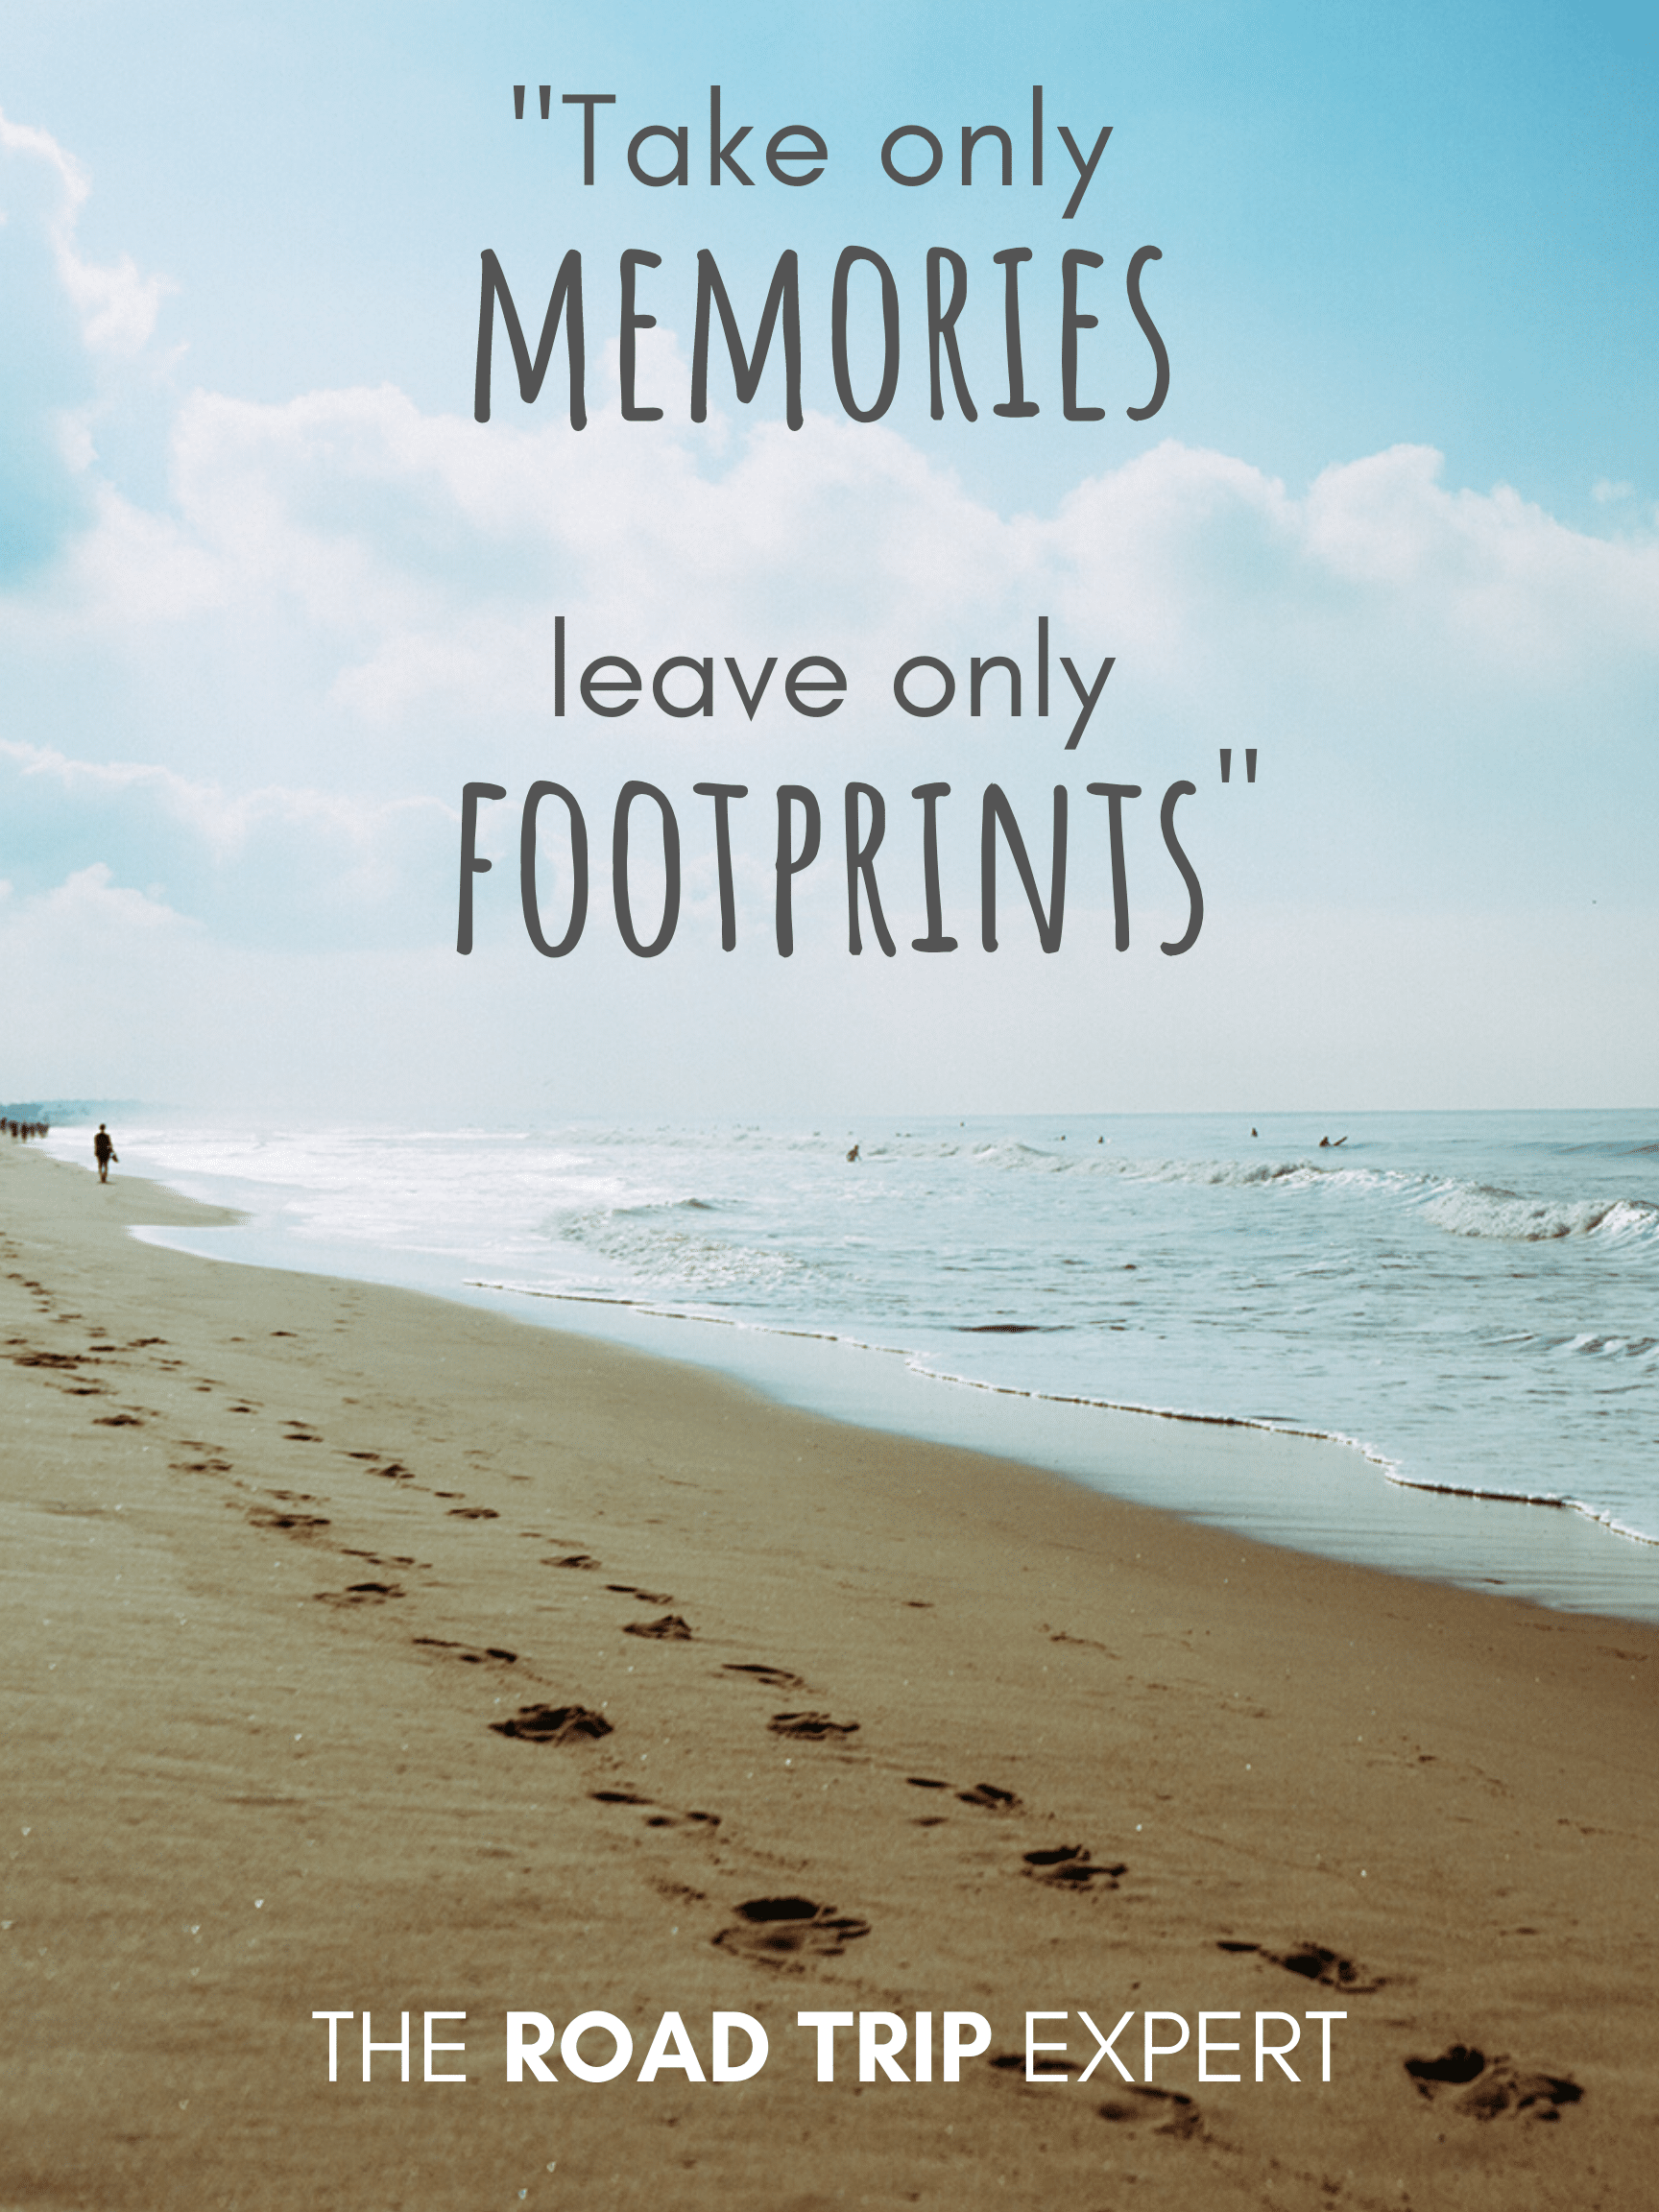 a trip to remember meaning